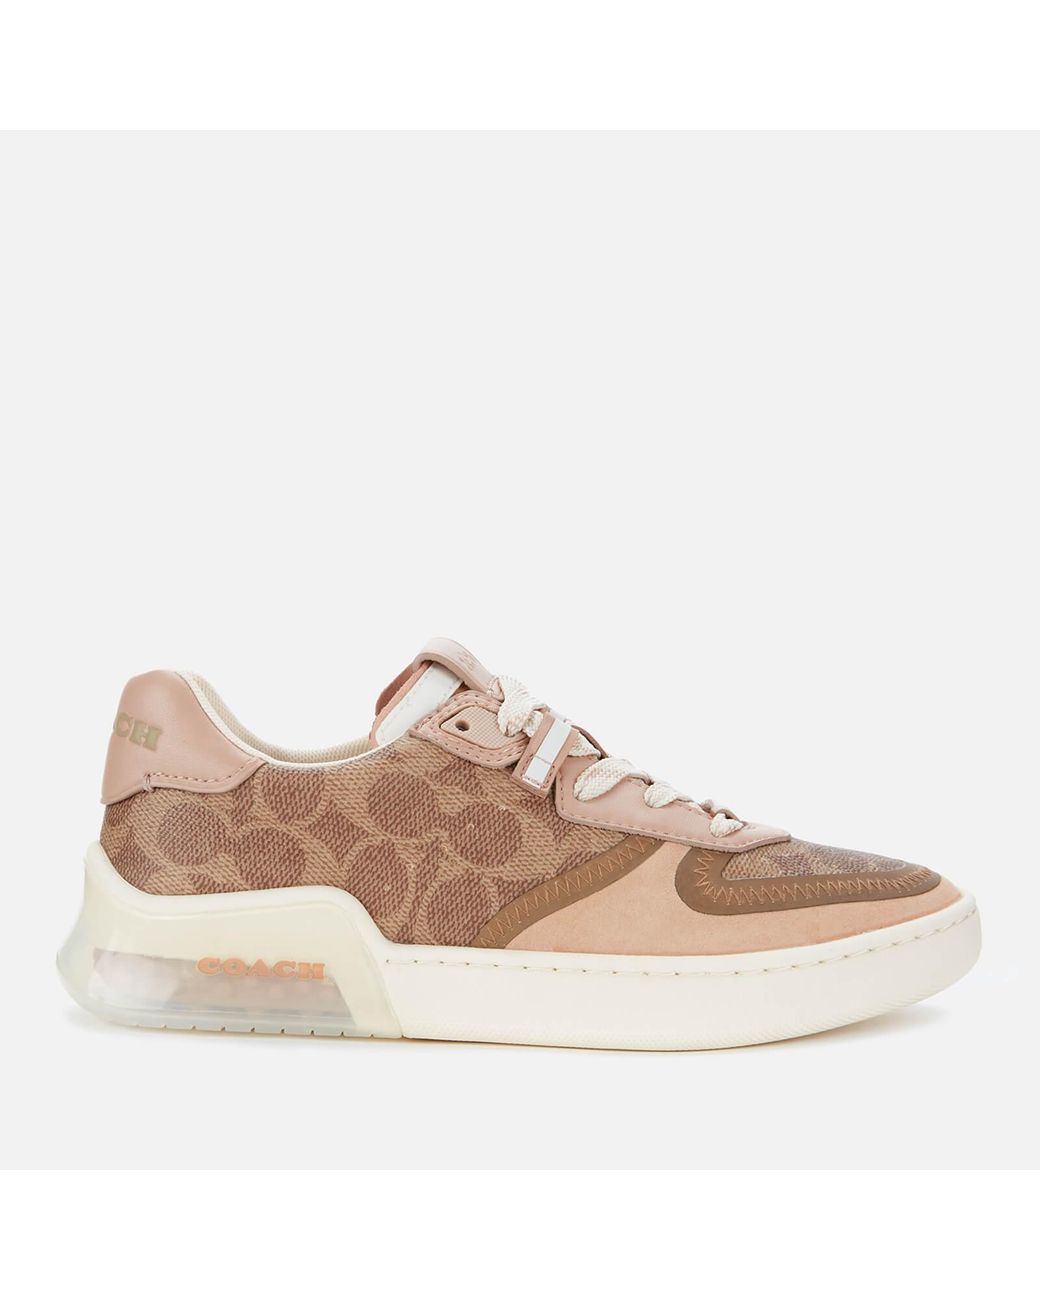 COACH Canvas Citysole Signature Print Court Trainers in Tan (Pink) - Lyst